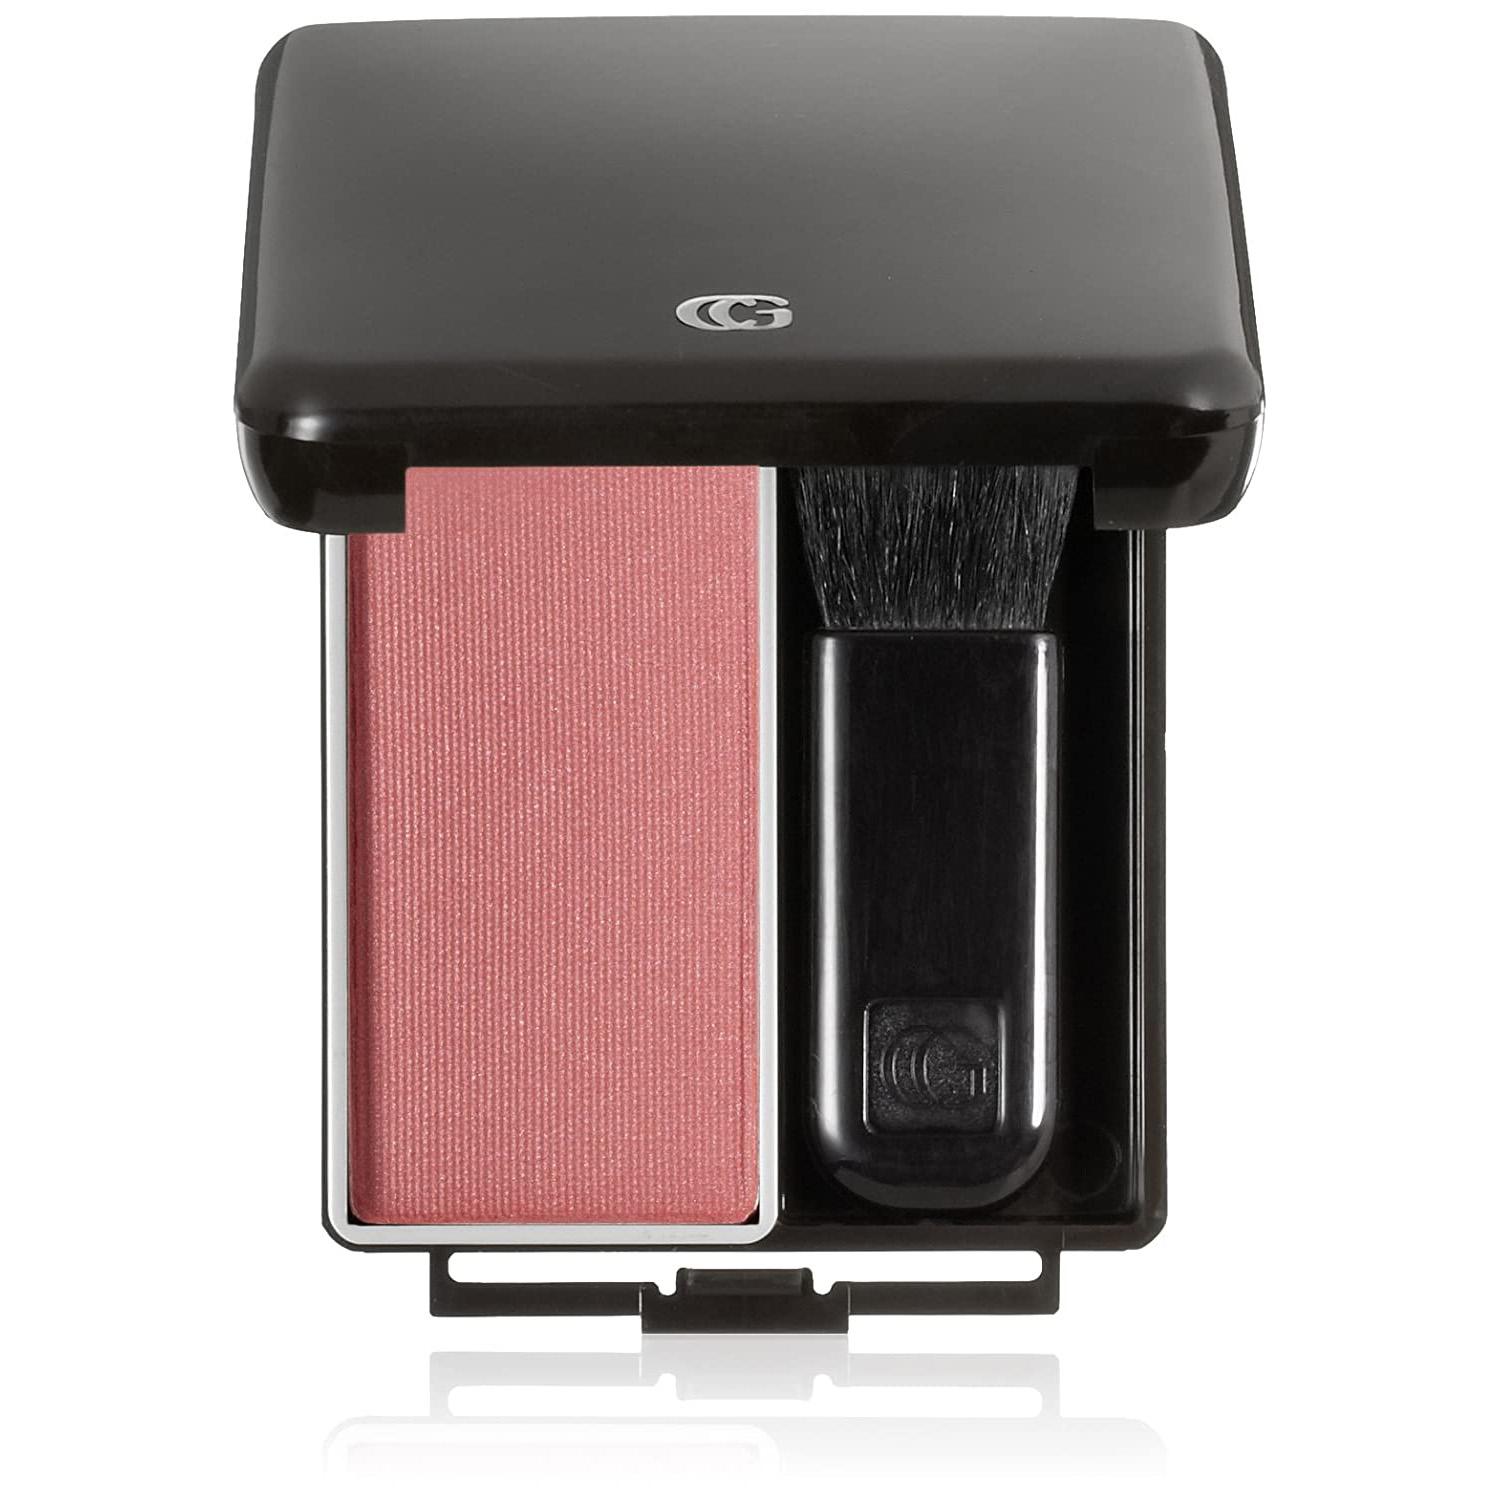 Covergirl Classic Color Blush Iced Plum for $1.54